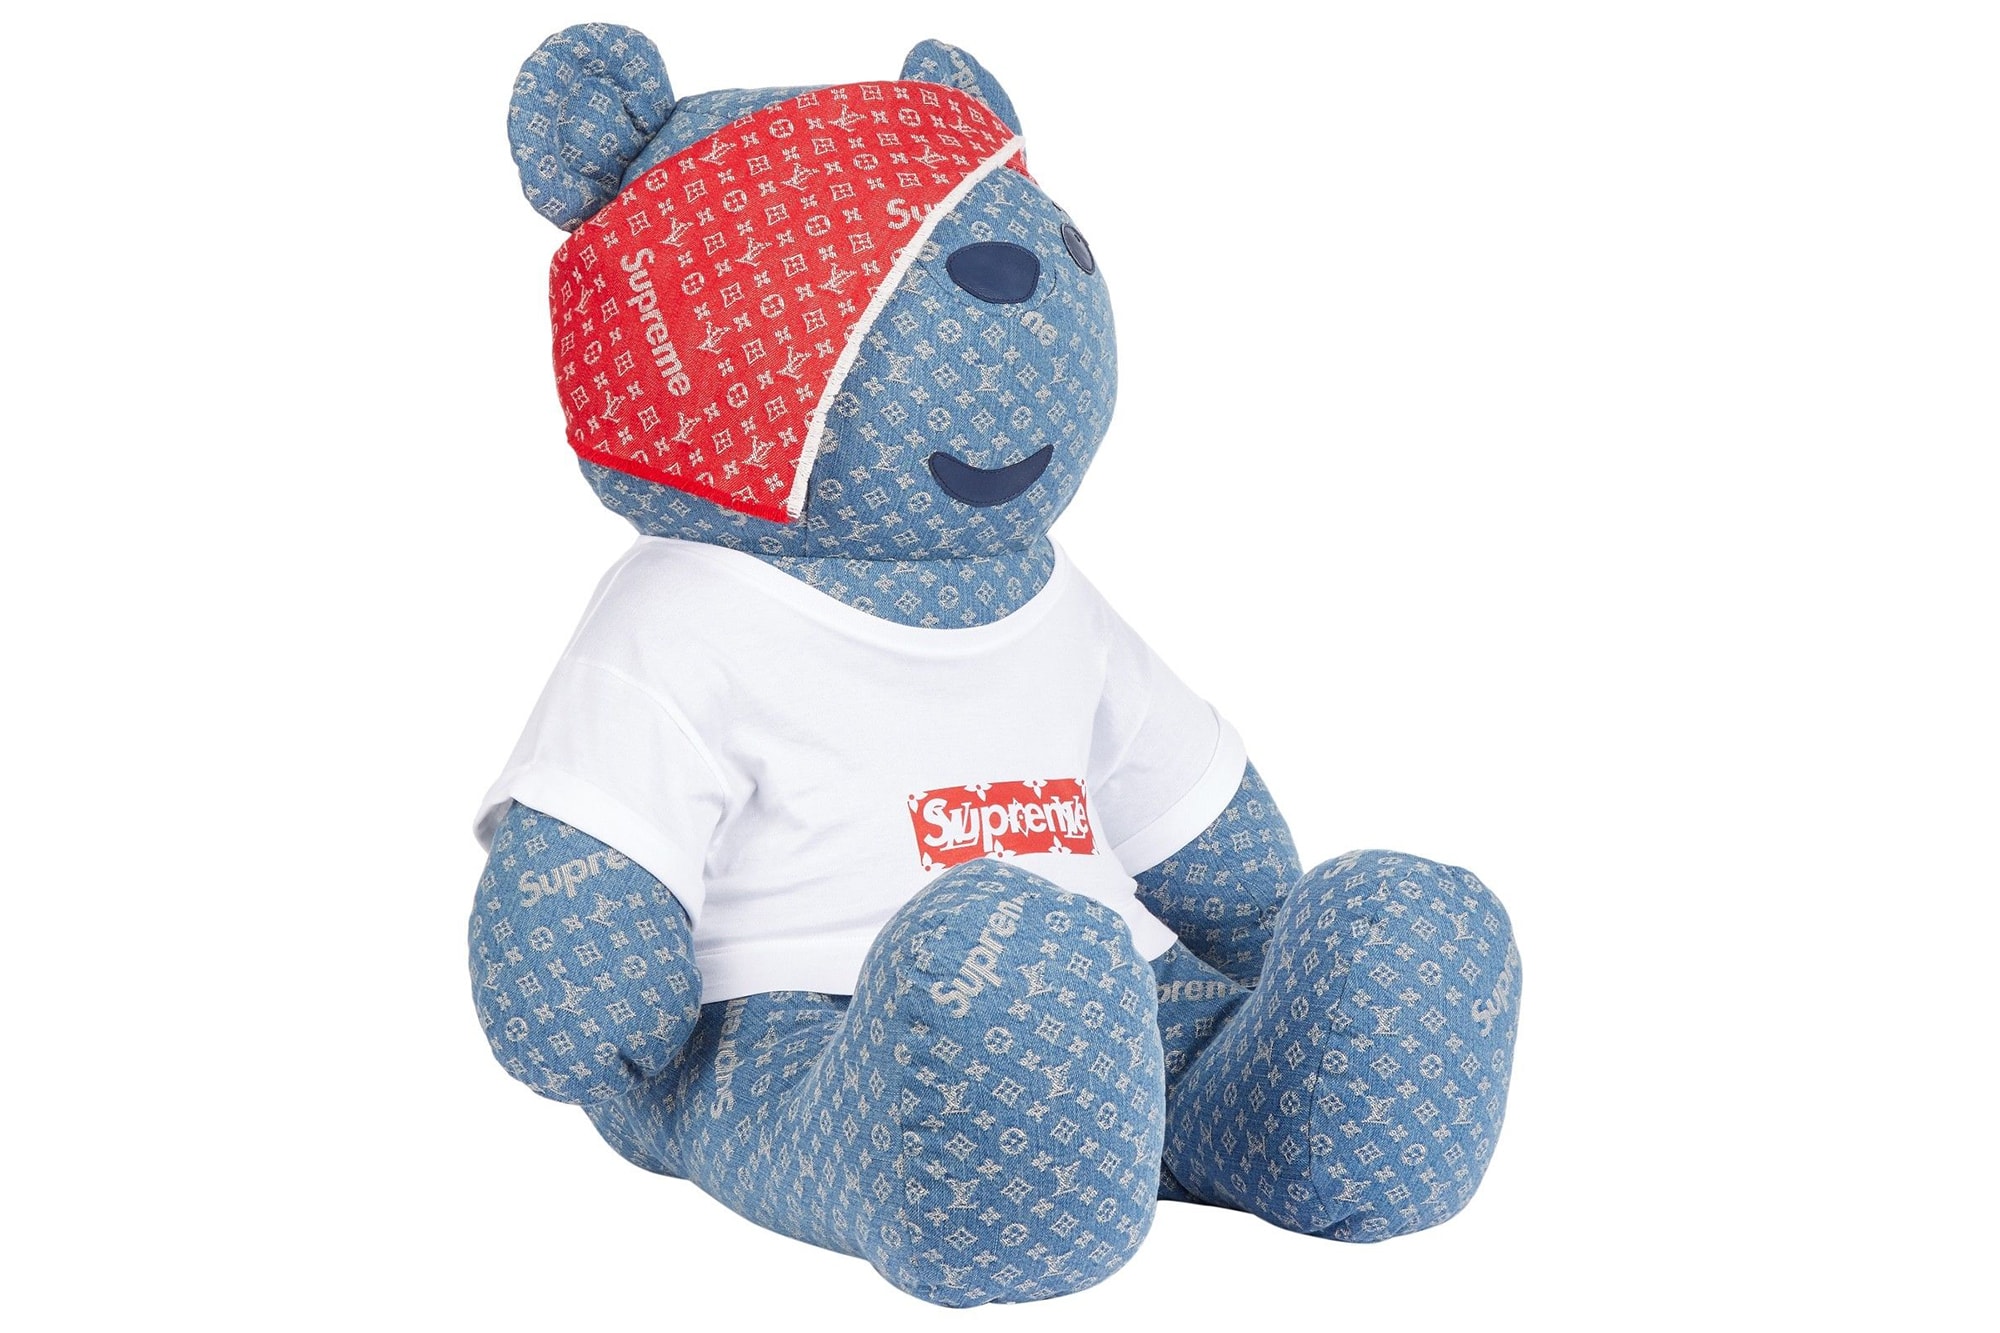 HYPEBEAST - Check out this one of a kind Louis Vuitton x Supreme bear made  for BBC Children in Need. 🐻 Photo: Kim Jones